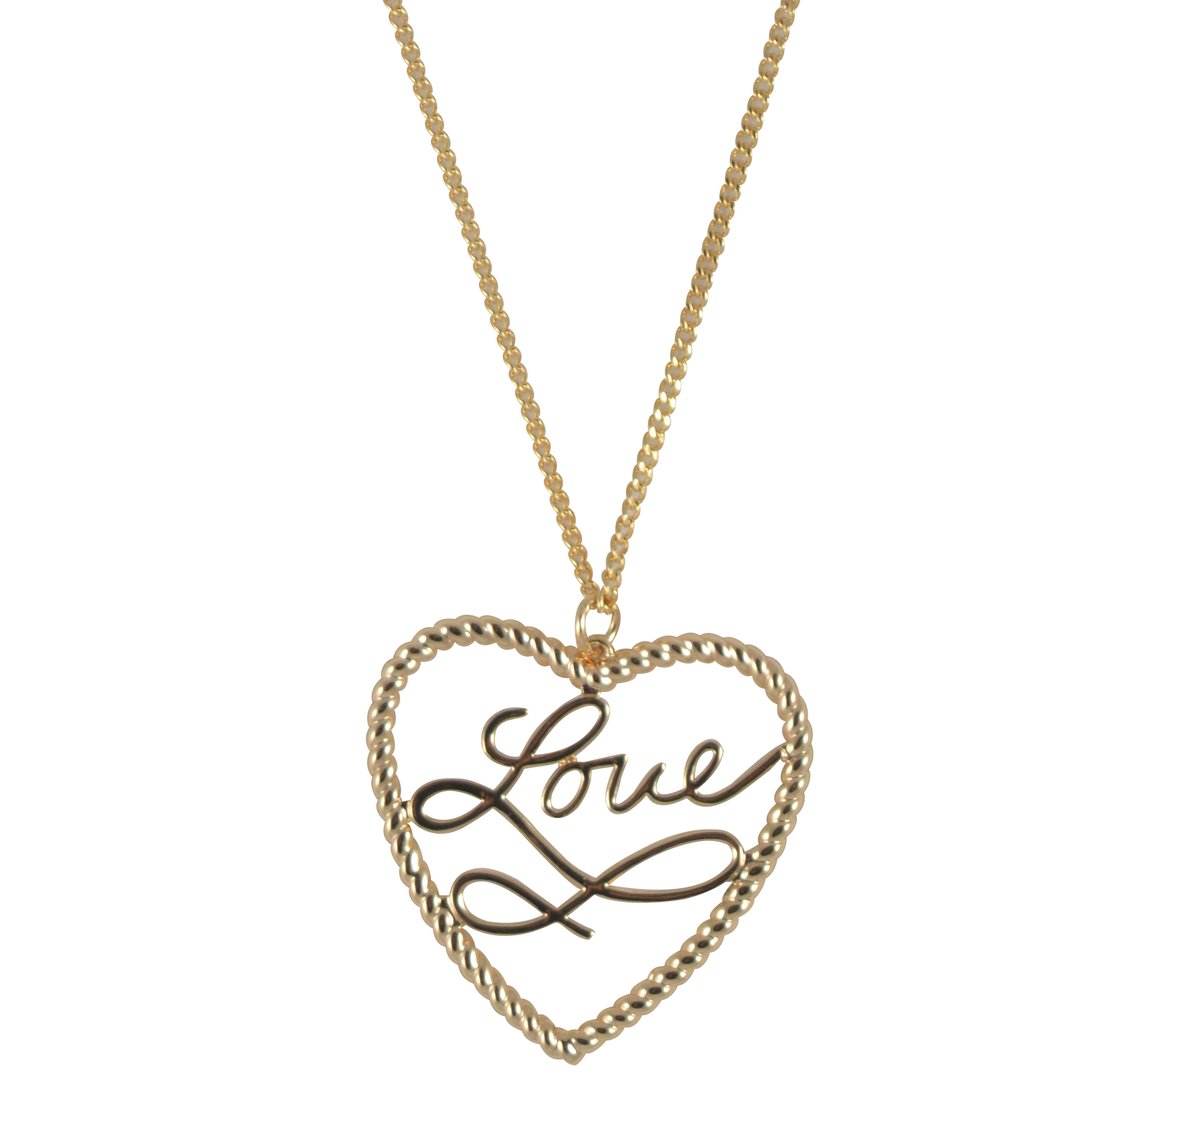 Love Rope Necklace